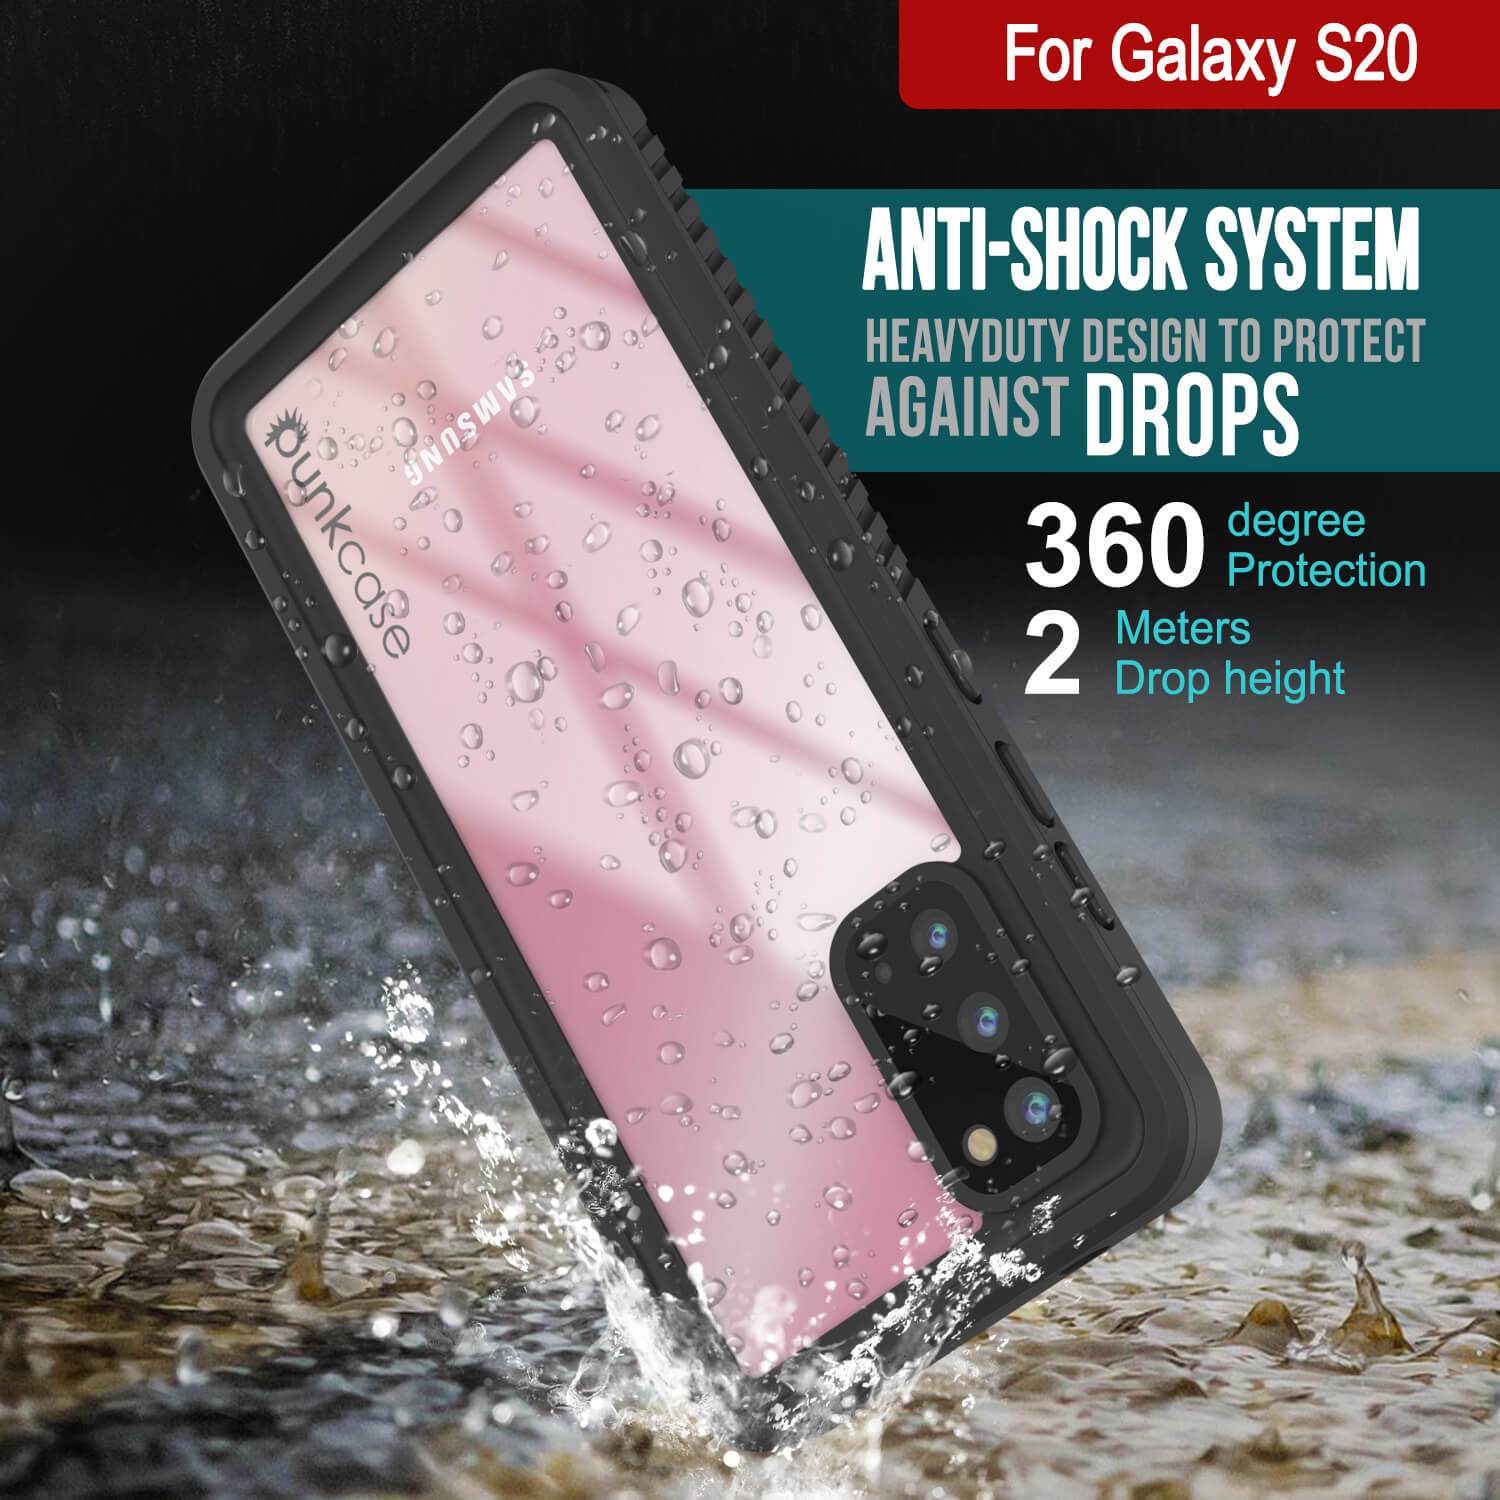 Galaxy S20 Water/Shockproof [Extreme Series] With Screen Protector Case [Black]